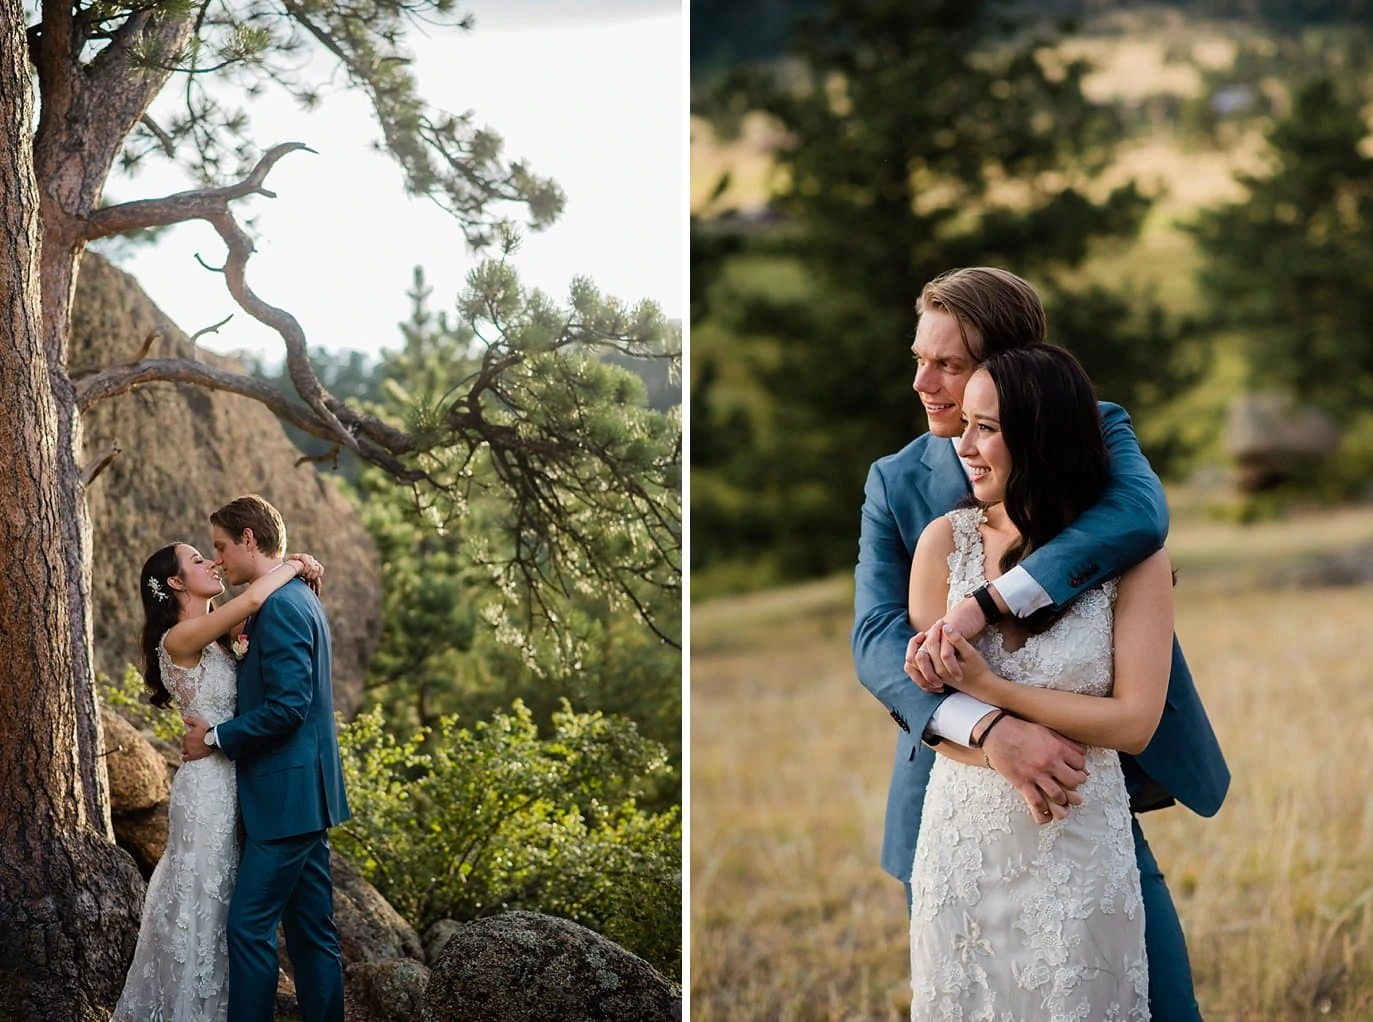 bride and groom embrace at sunset for romantic photos t Twin Owls Steakhouse wedding by Denver wedding photographer Jennie Crate photographer